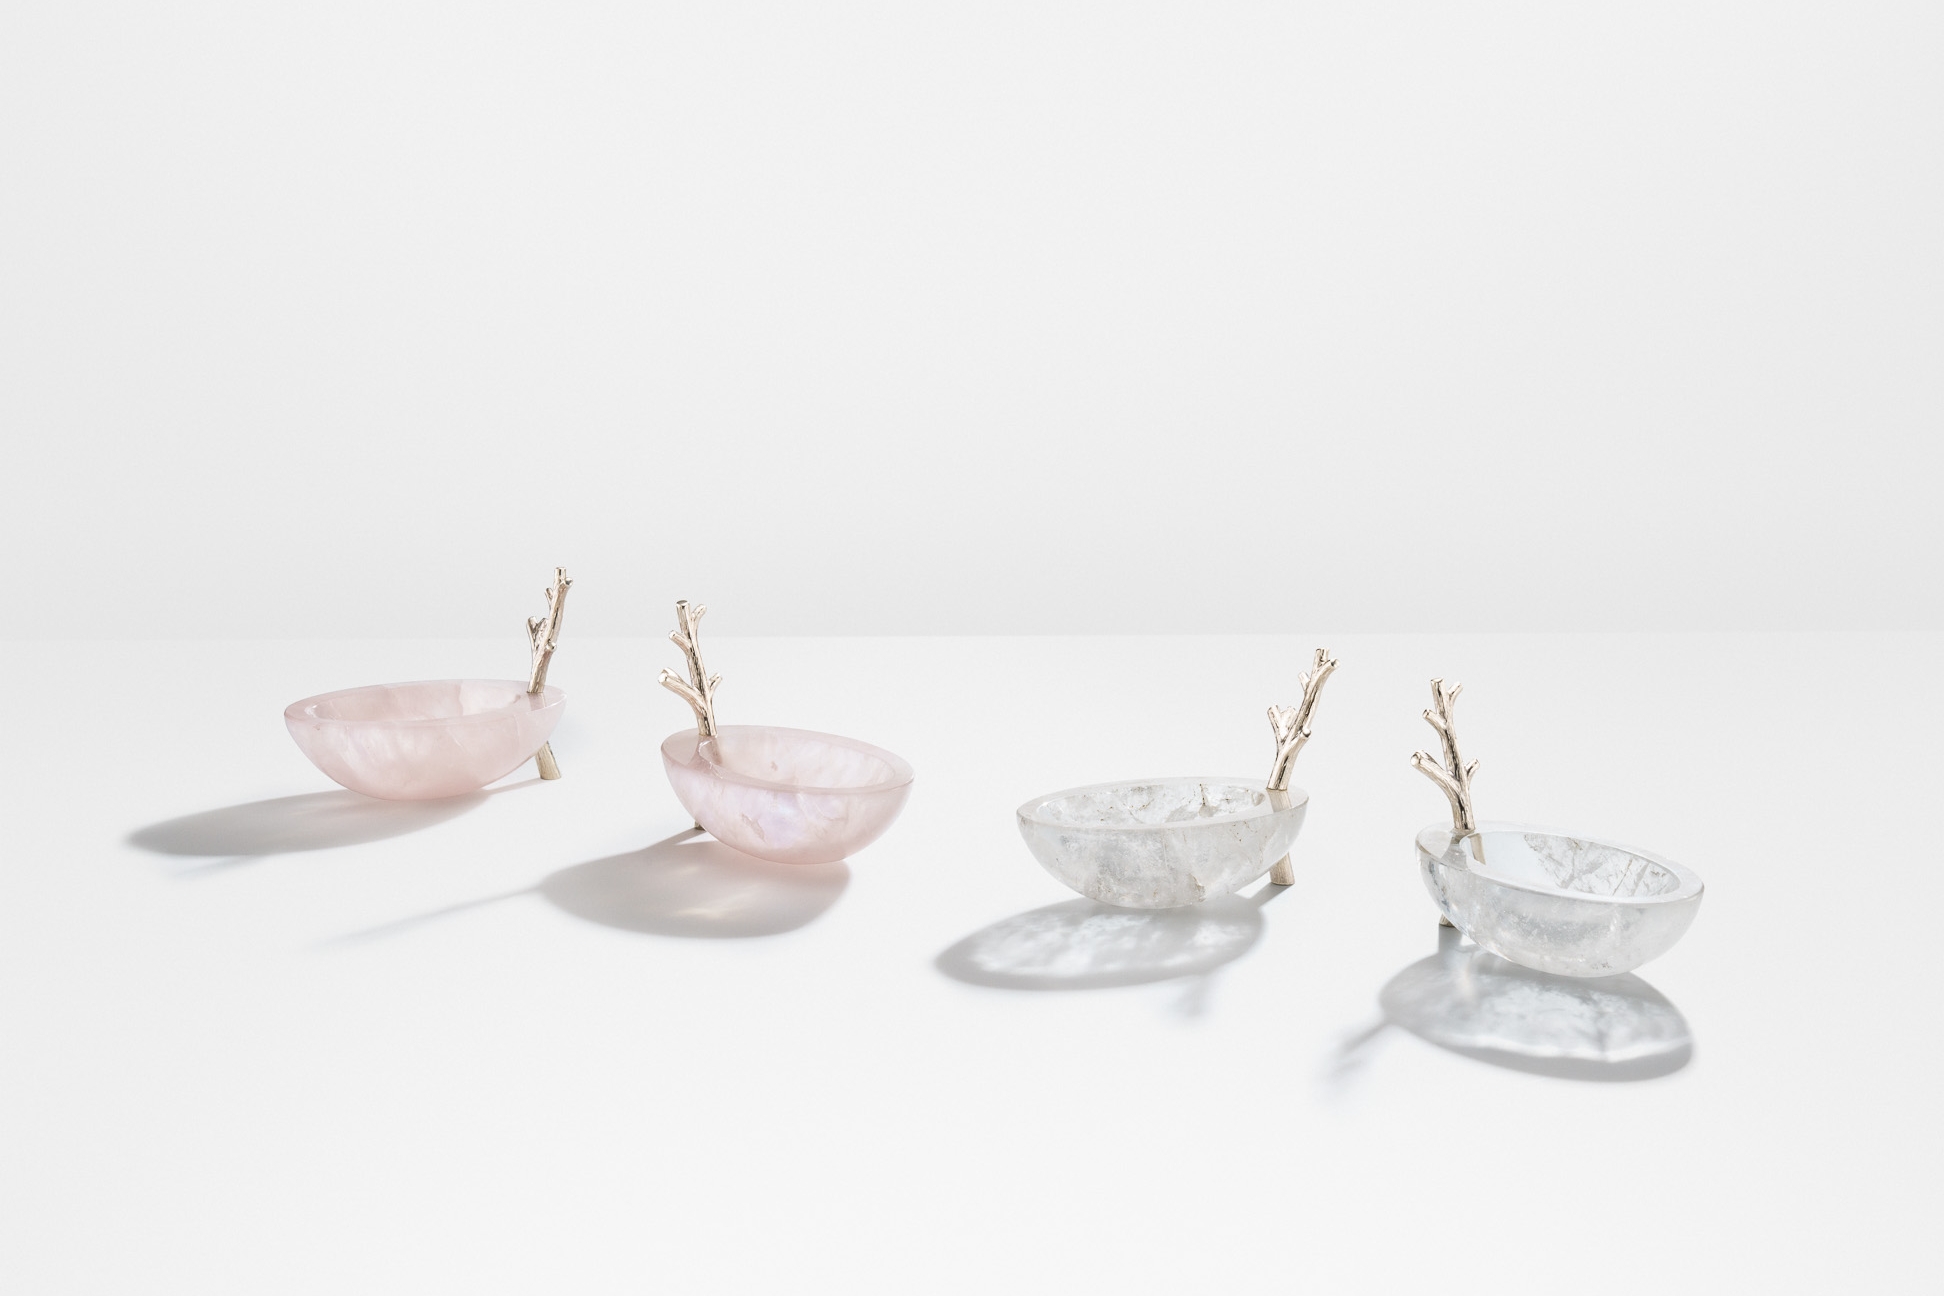 Crystal bowls - pink and clear pairs-LOW-RES.jpg